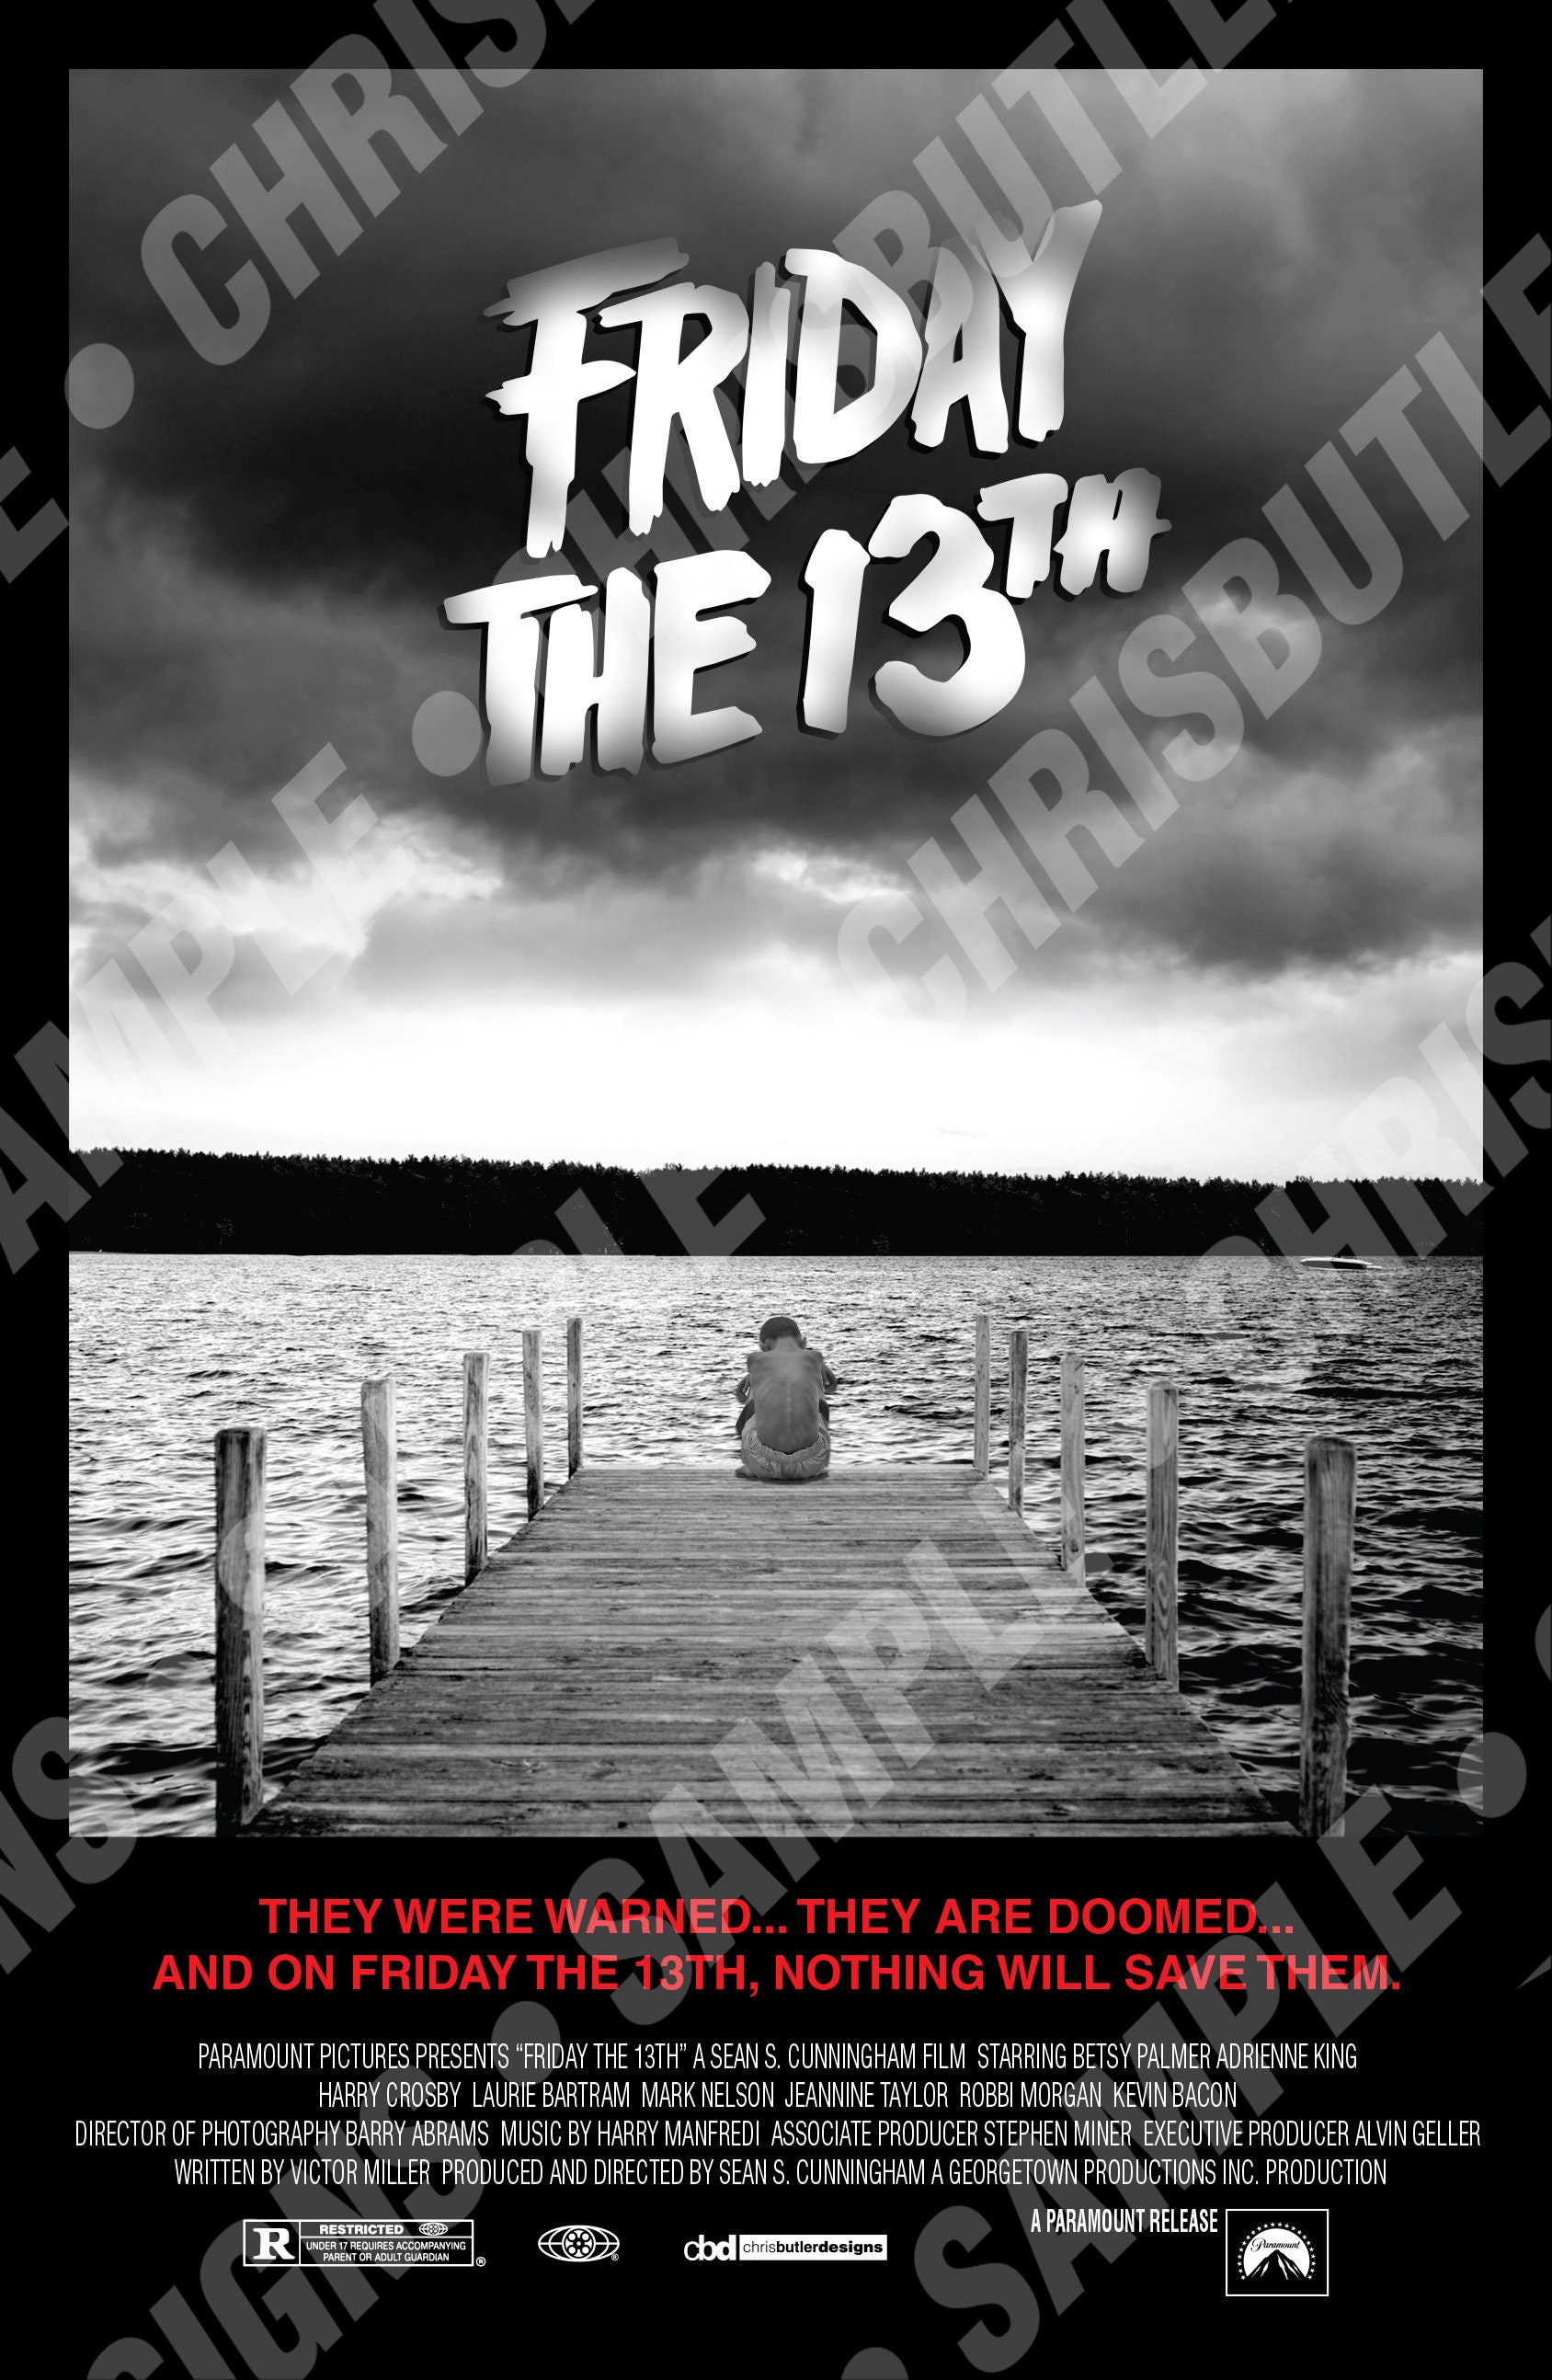 Poster analysis friday the 13th